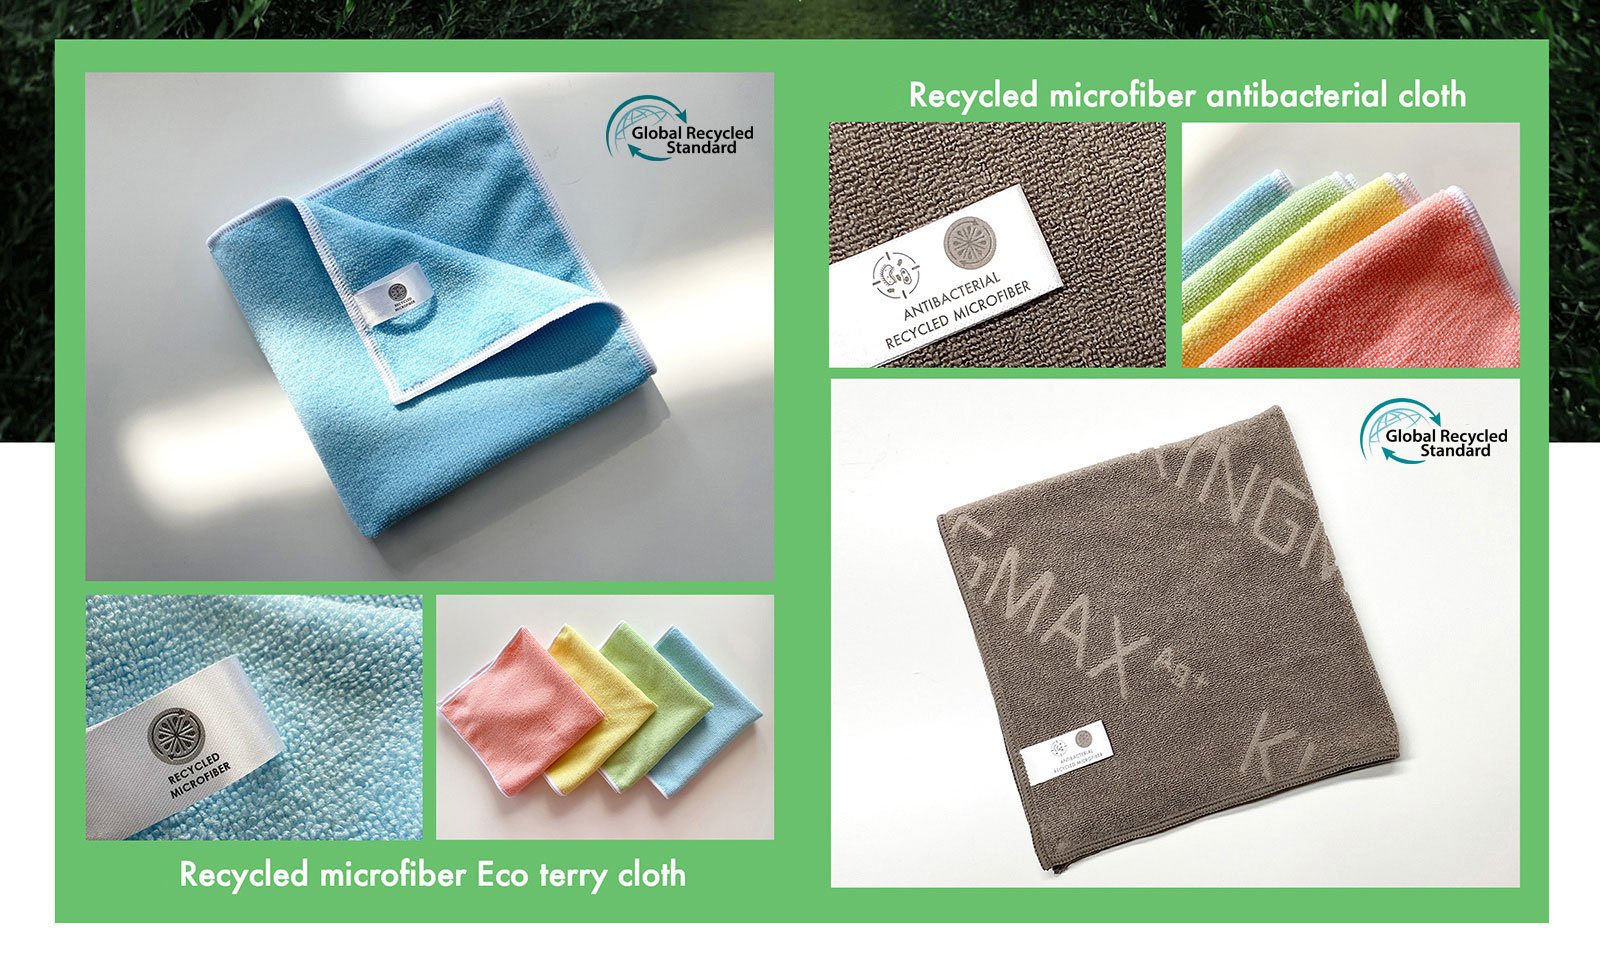 KINGMAX GREAT TOWEL is an eco-friendly rPET towel, made from recycled microfiber; our rPET towel making process is sustainable and traceable.